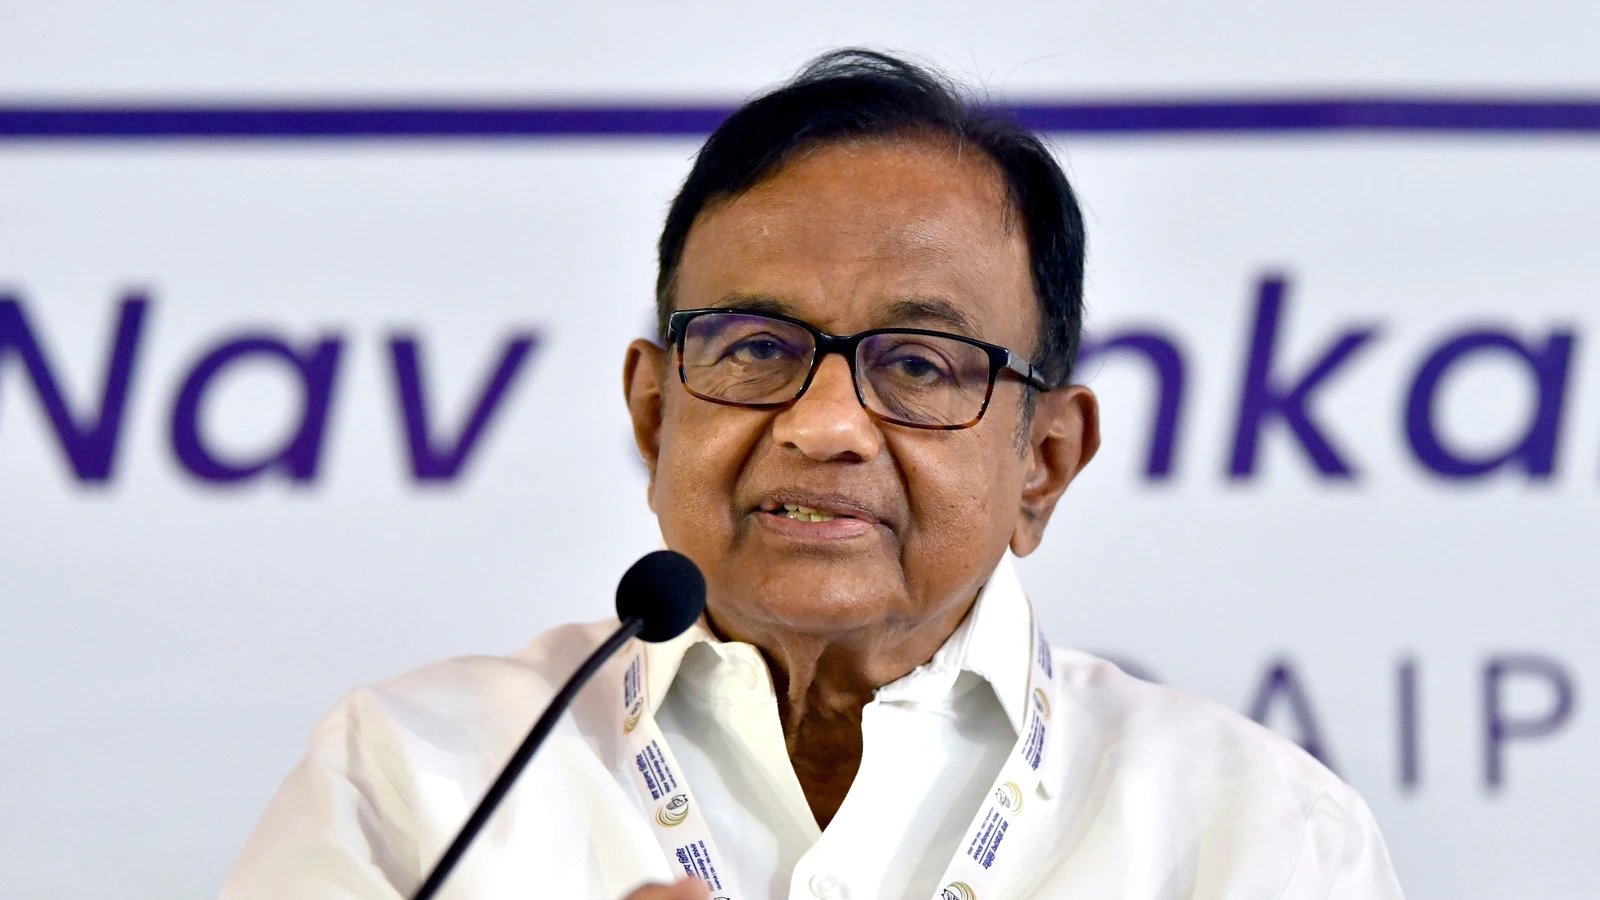 PM should’ve intervened, but silence not new: Chidambaram on Prophet remarks row